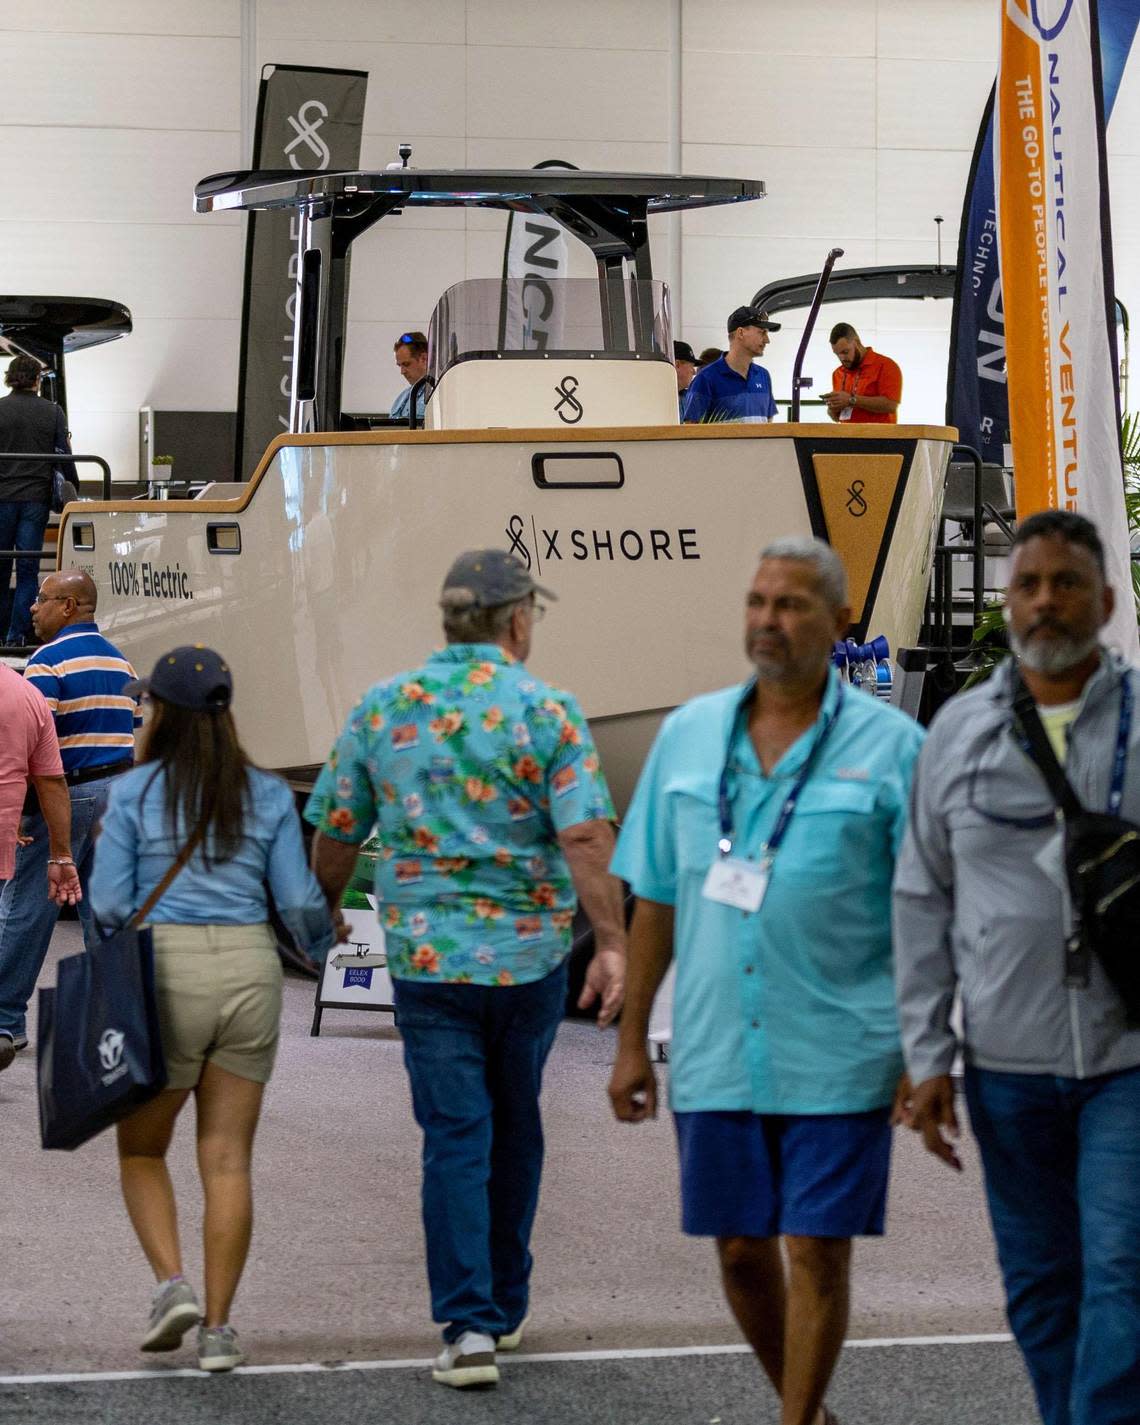 Visitors walk in front of one of the high-end electric boats from Swedish manufacturer X-Shore on display at the Miami International Boat Show.